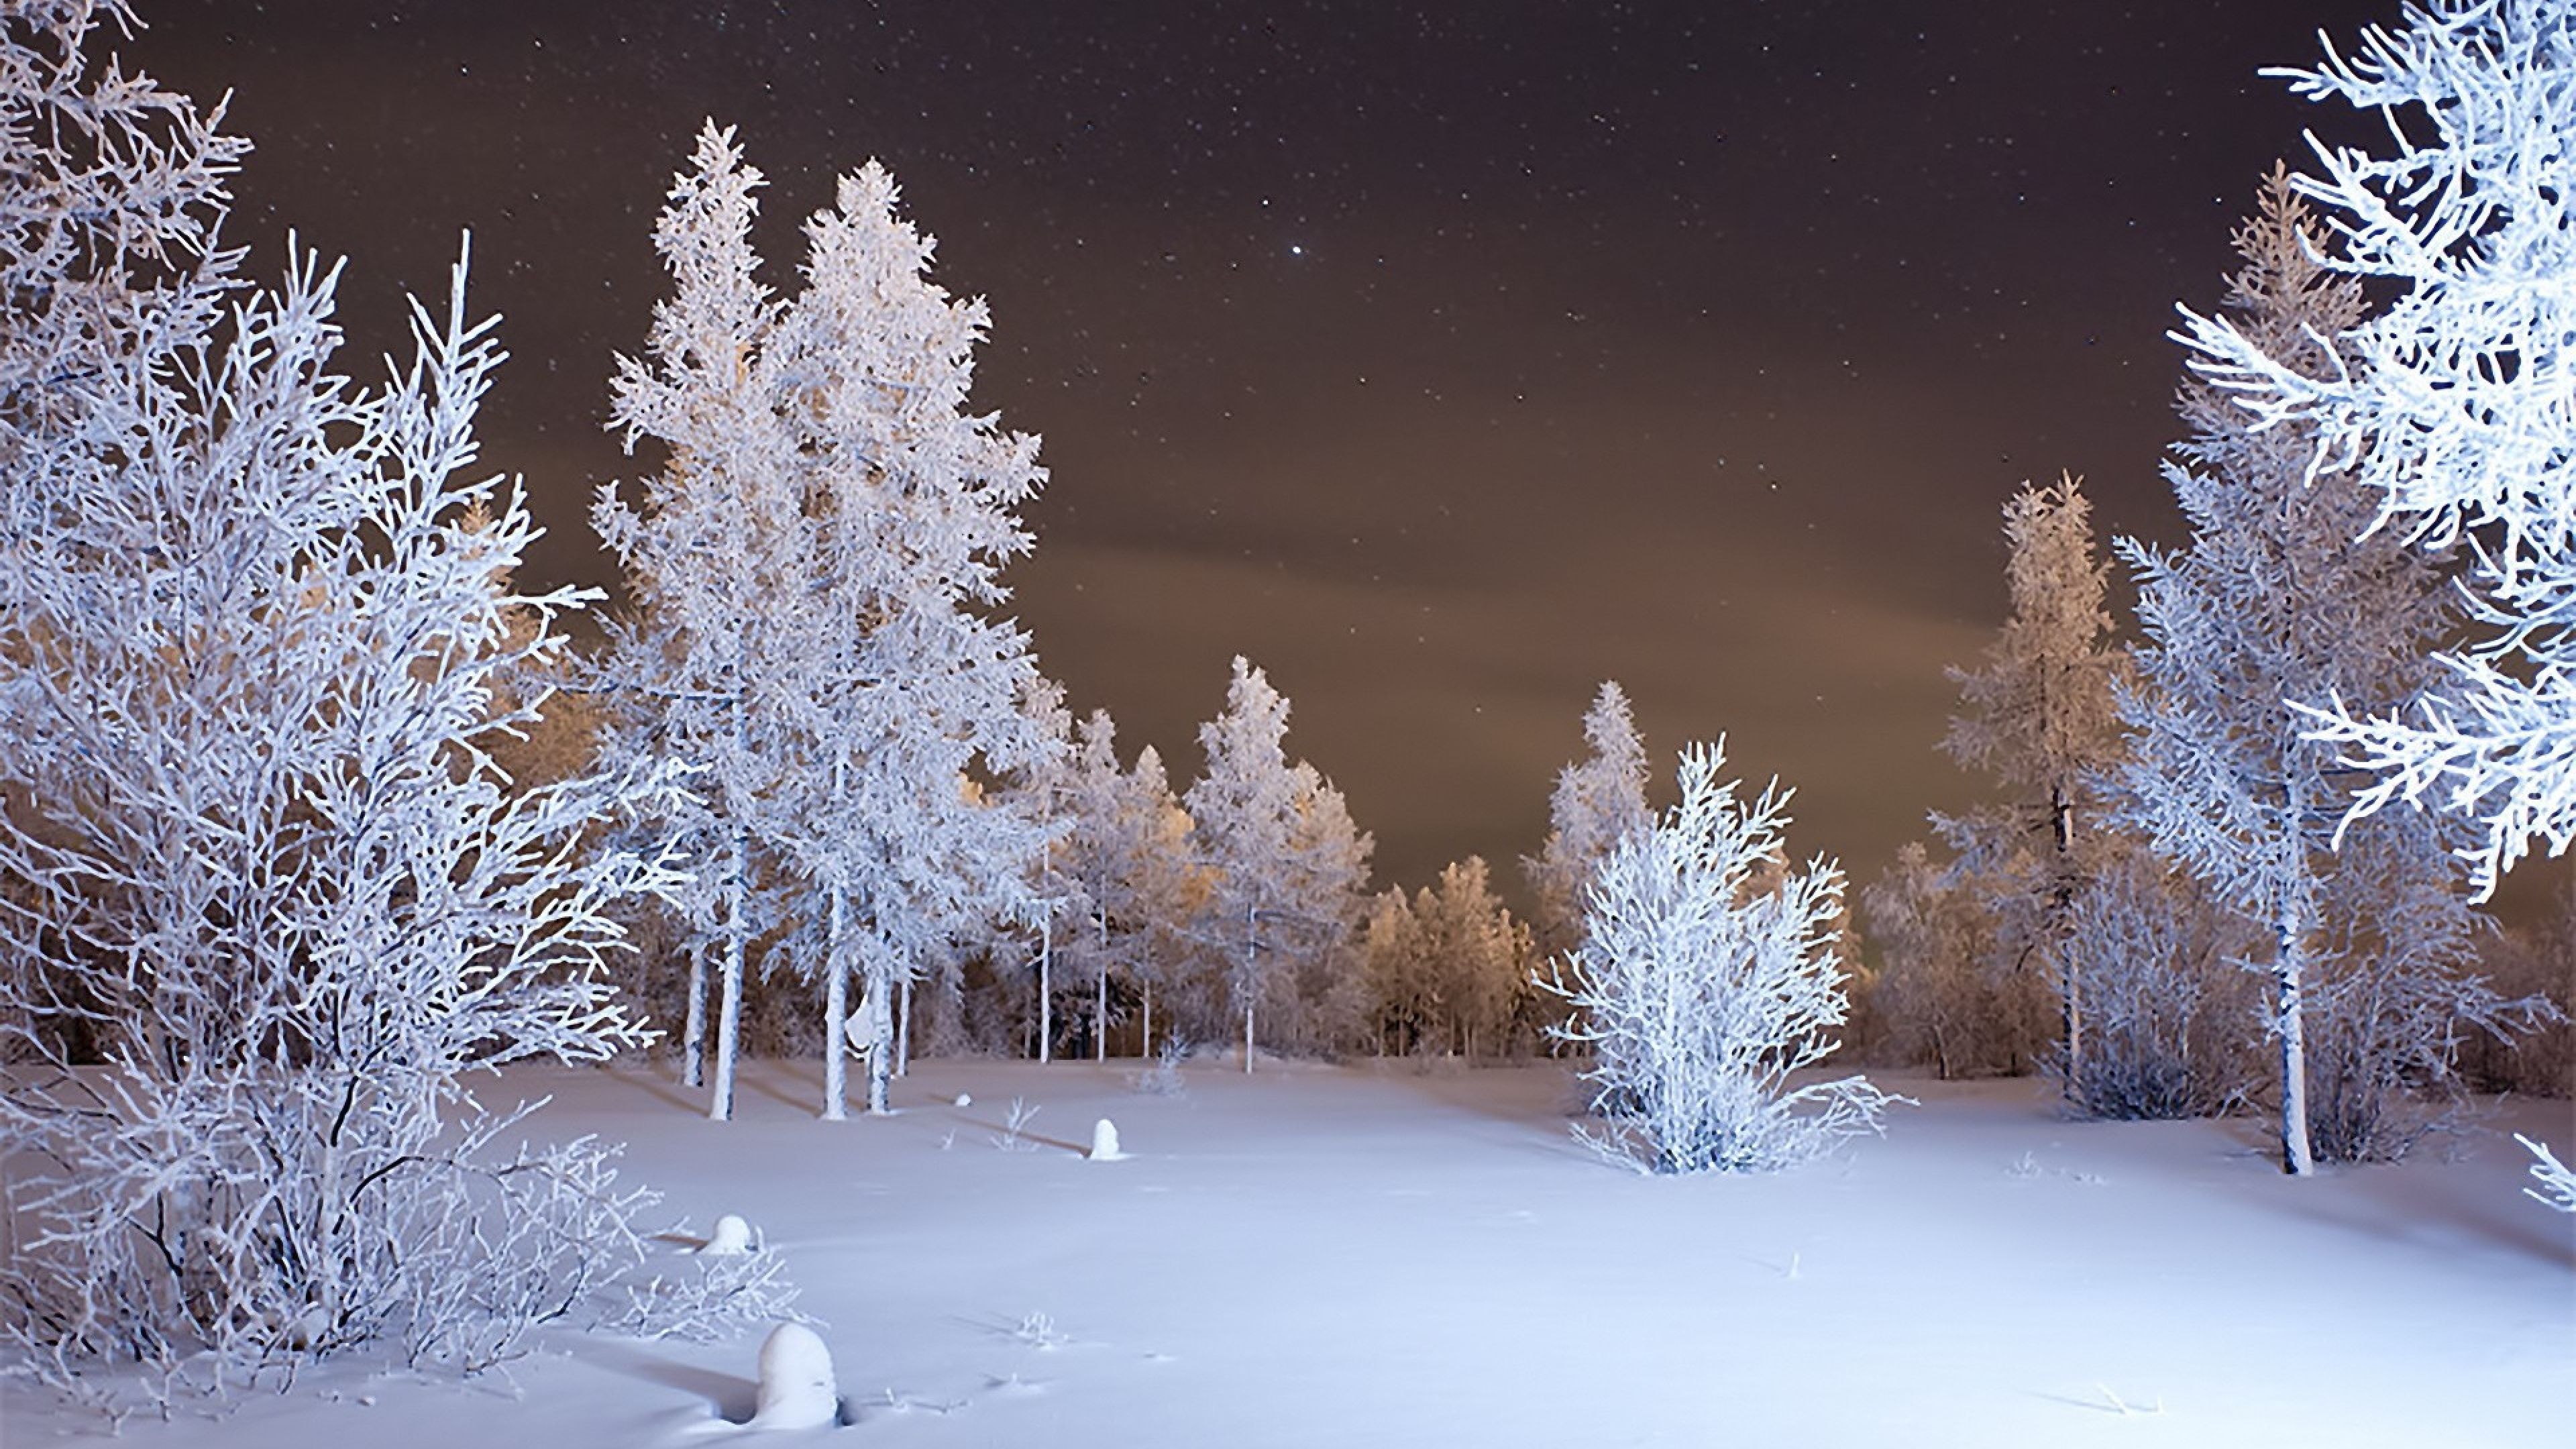 20 Choices 4k desktop wallpaper winter You Can Use It For Free ...